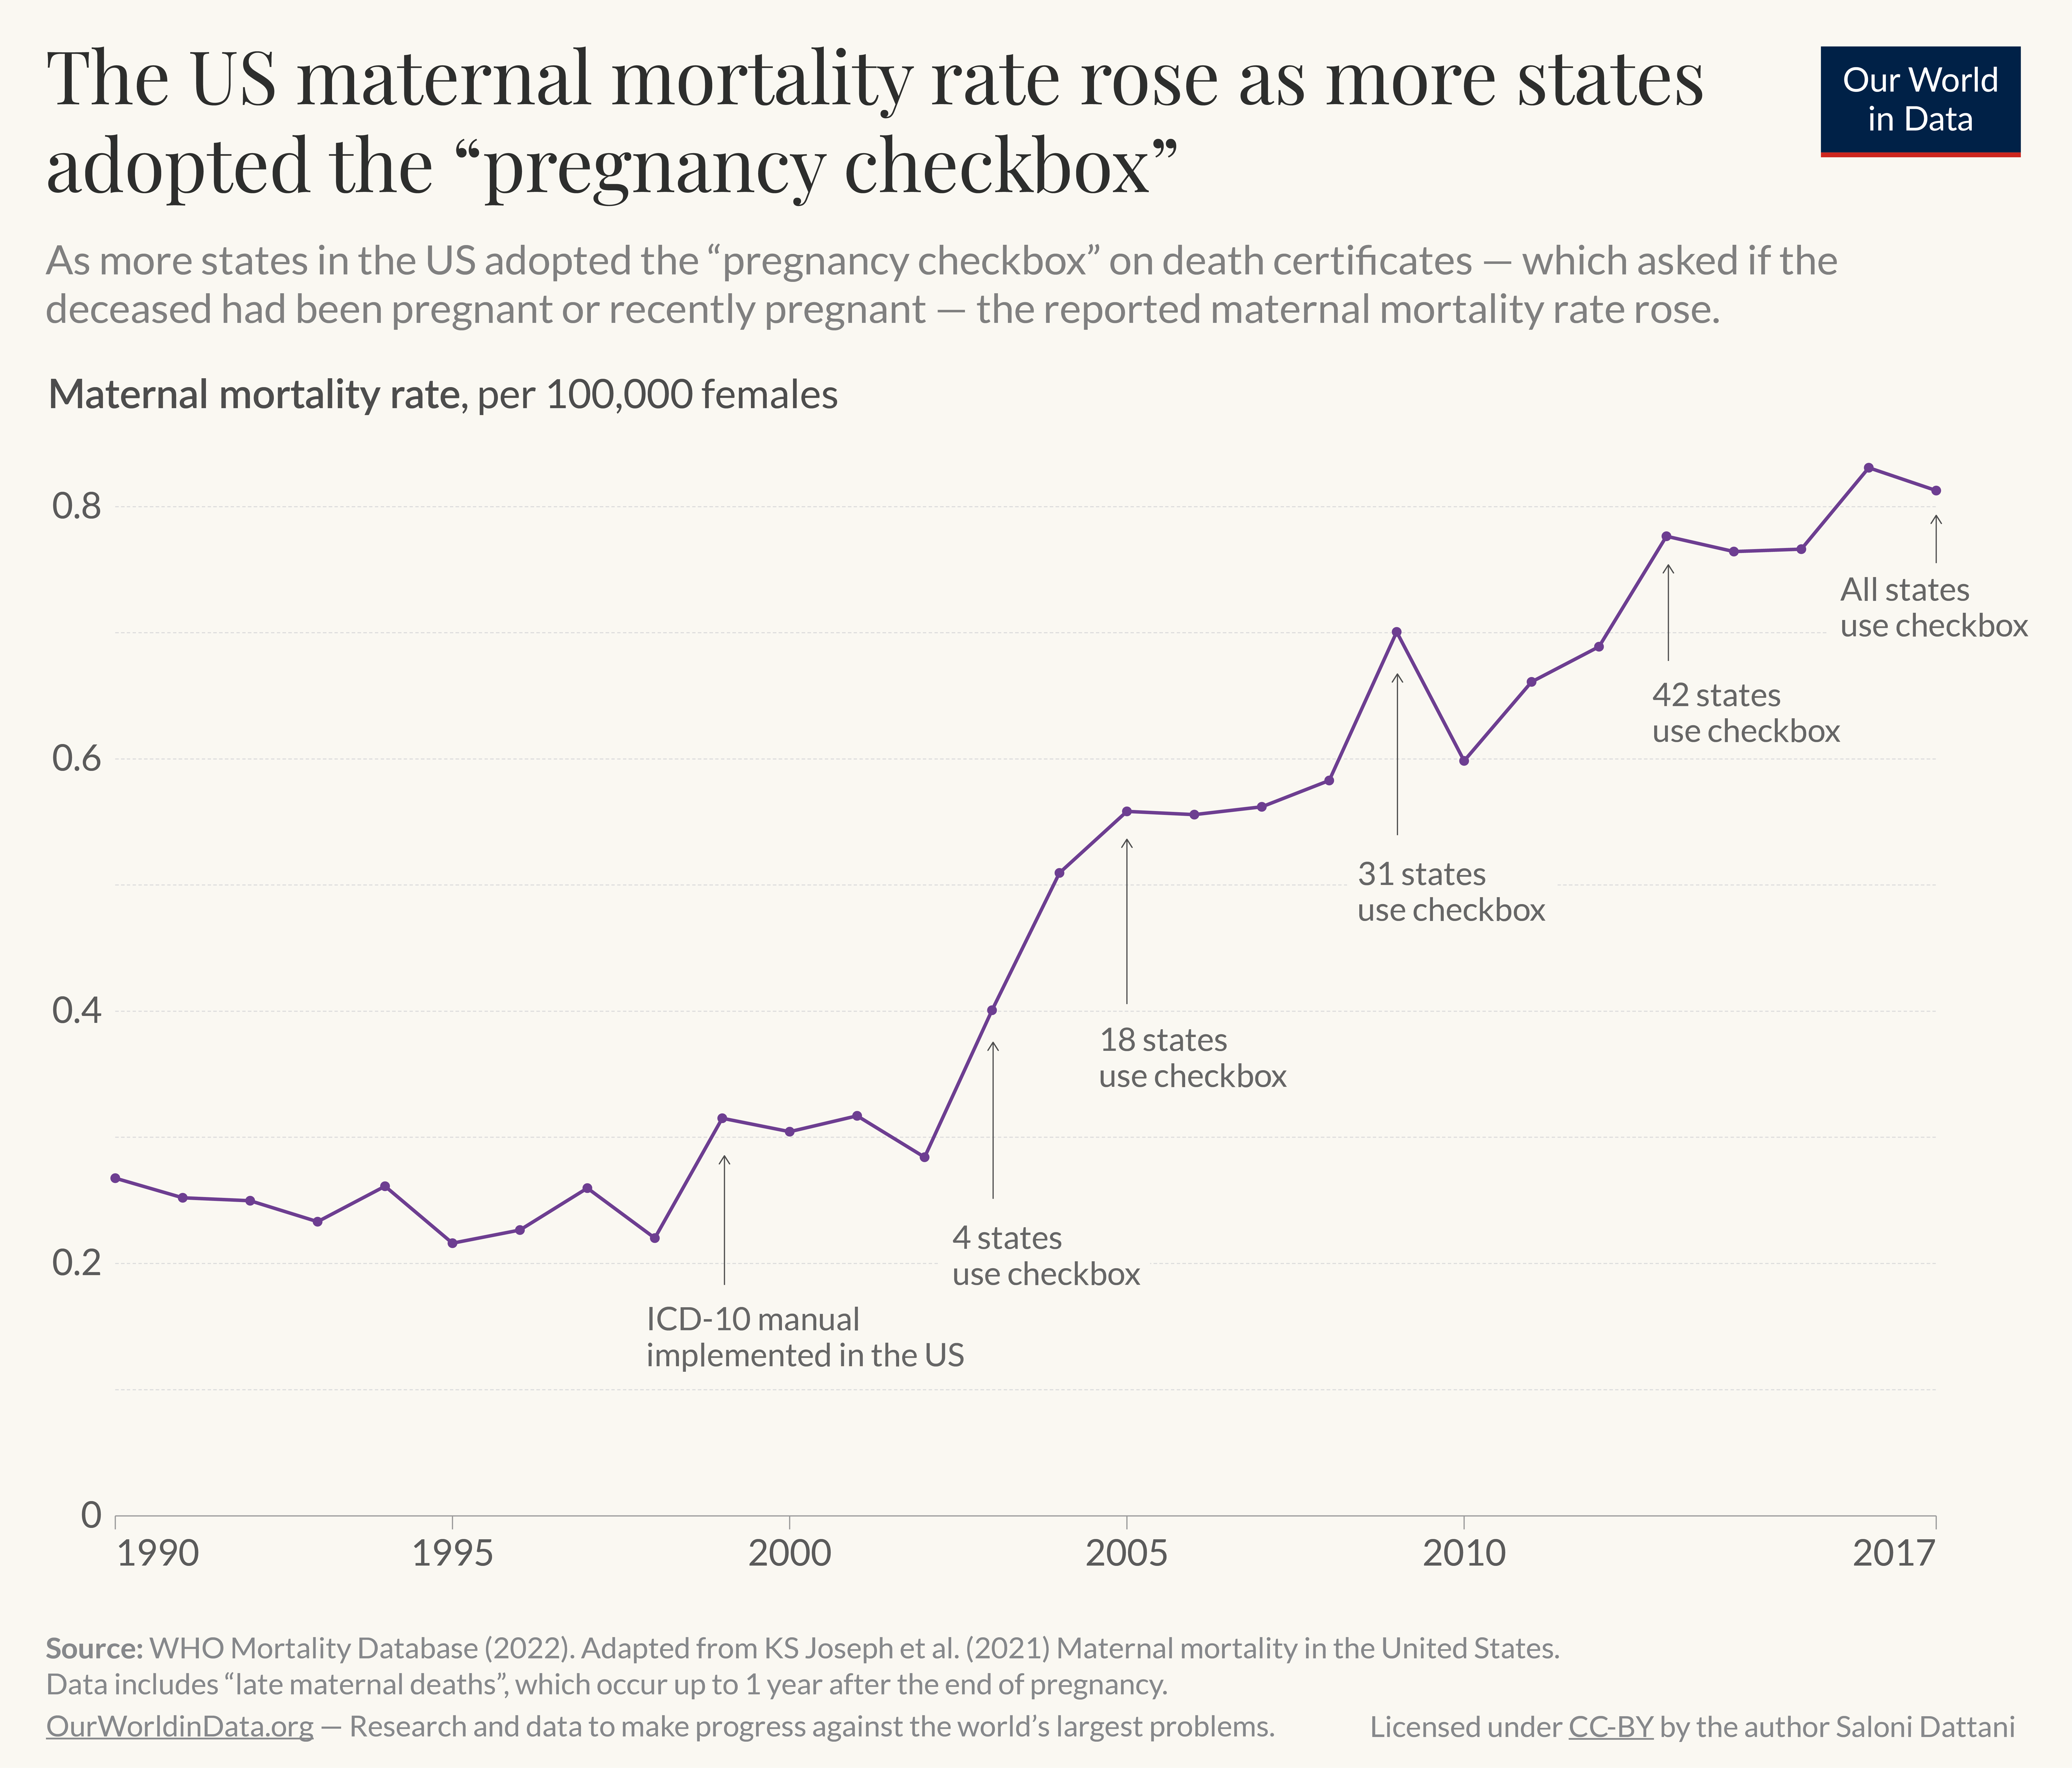 The image is a line graph titled "The US maternal mortality rate rose as more states adopted the “pregnancy checkbox”". It indicates that as more states in the United States incorporated a pregnancy checkbox into death certificates to ask if the deceased had been pregnant or recently pregnant, the reported maternal mortality rate increased. The line graph shows maternal mortality rate per 100,000 females from 1990 to 2017.

The source of the data is cited as WHO Mortality Database (2022) and adapted from KS Joseph et al. (2021) "Maternal mortality in the United States". Data includes "late maternal deaths", which occur up to 1 year after the end of pregnancy.